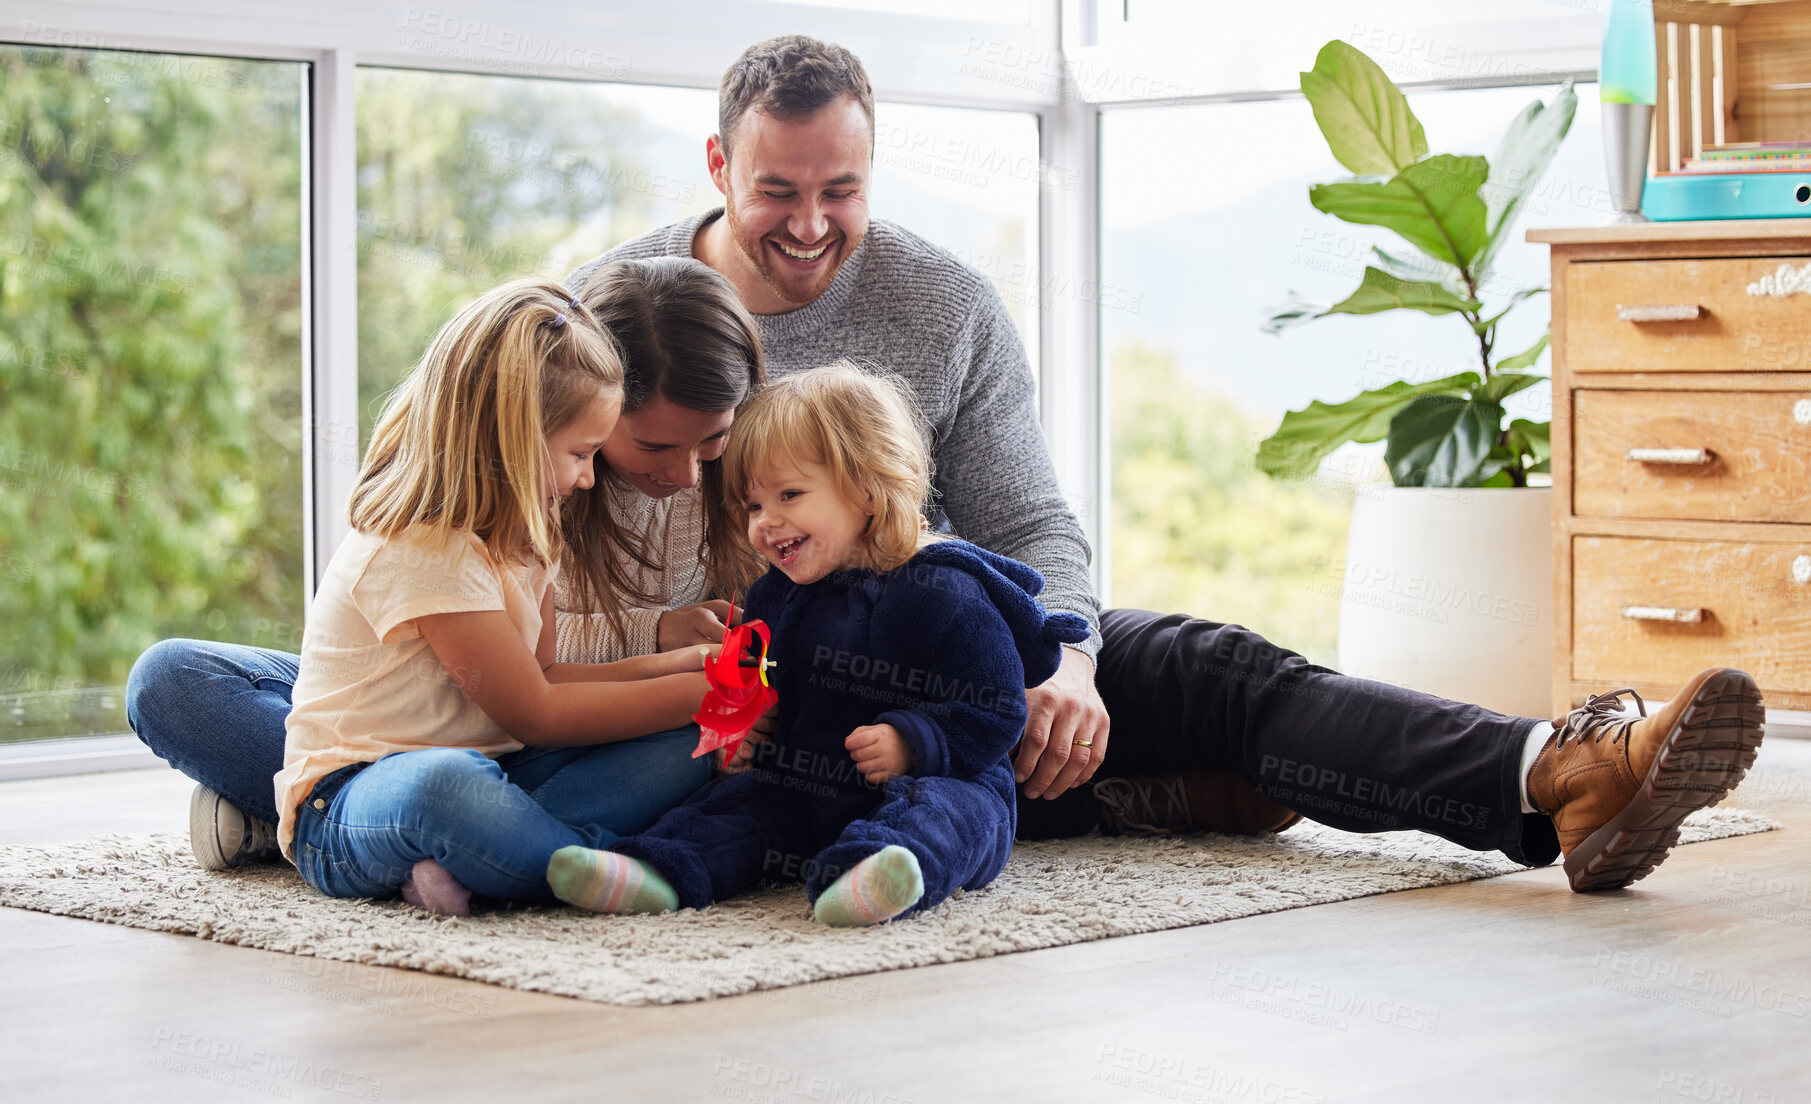 Buy stock photo Shot of a young family playing together at home